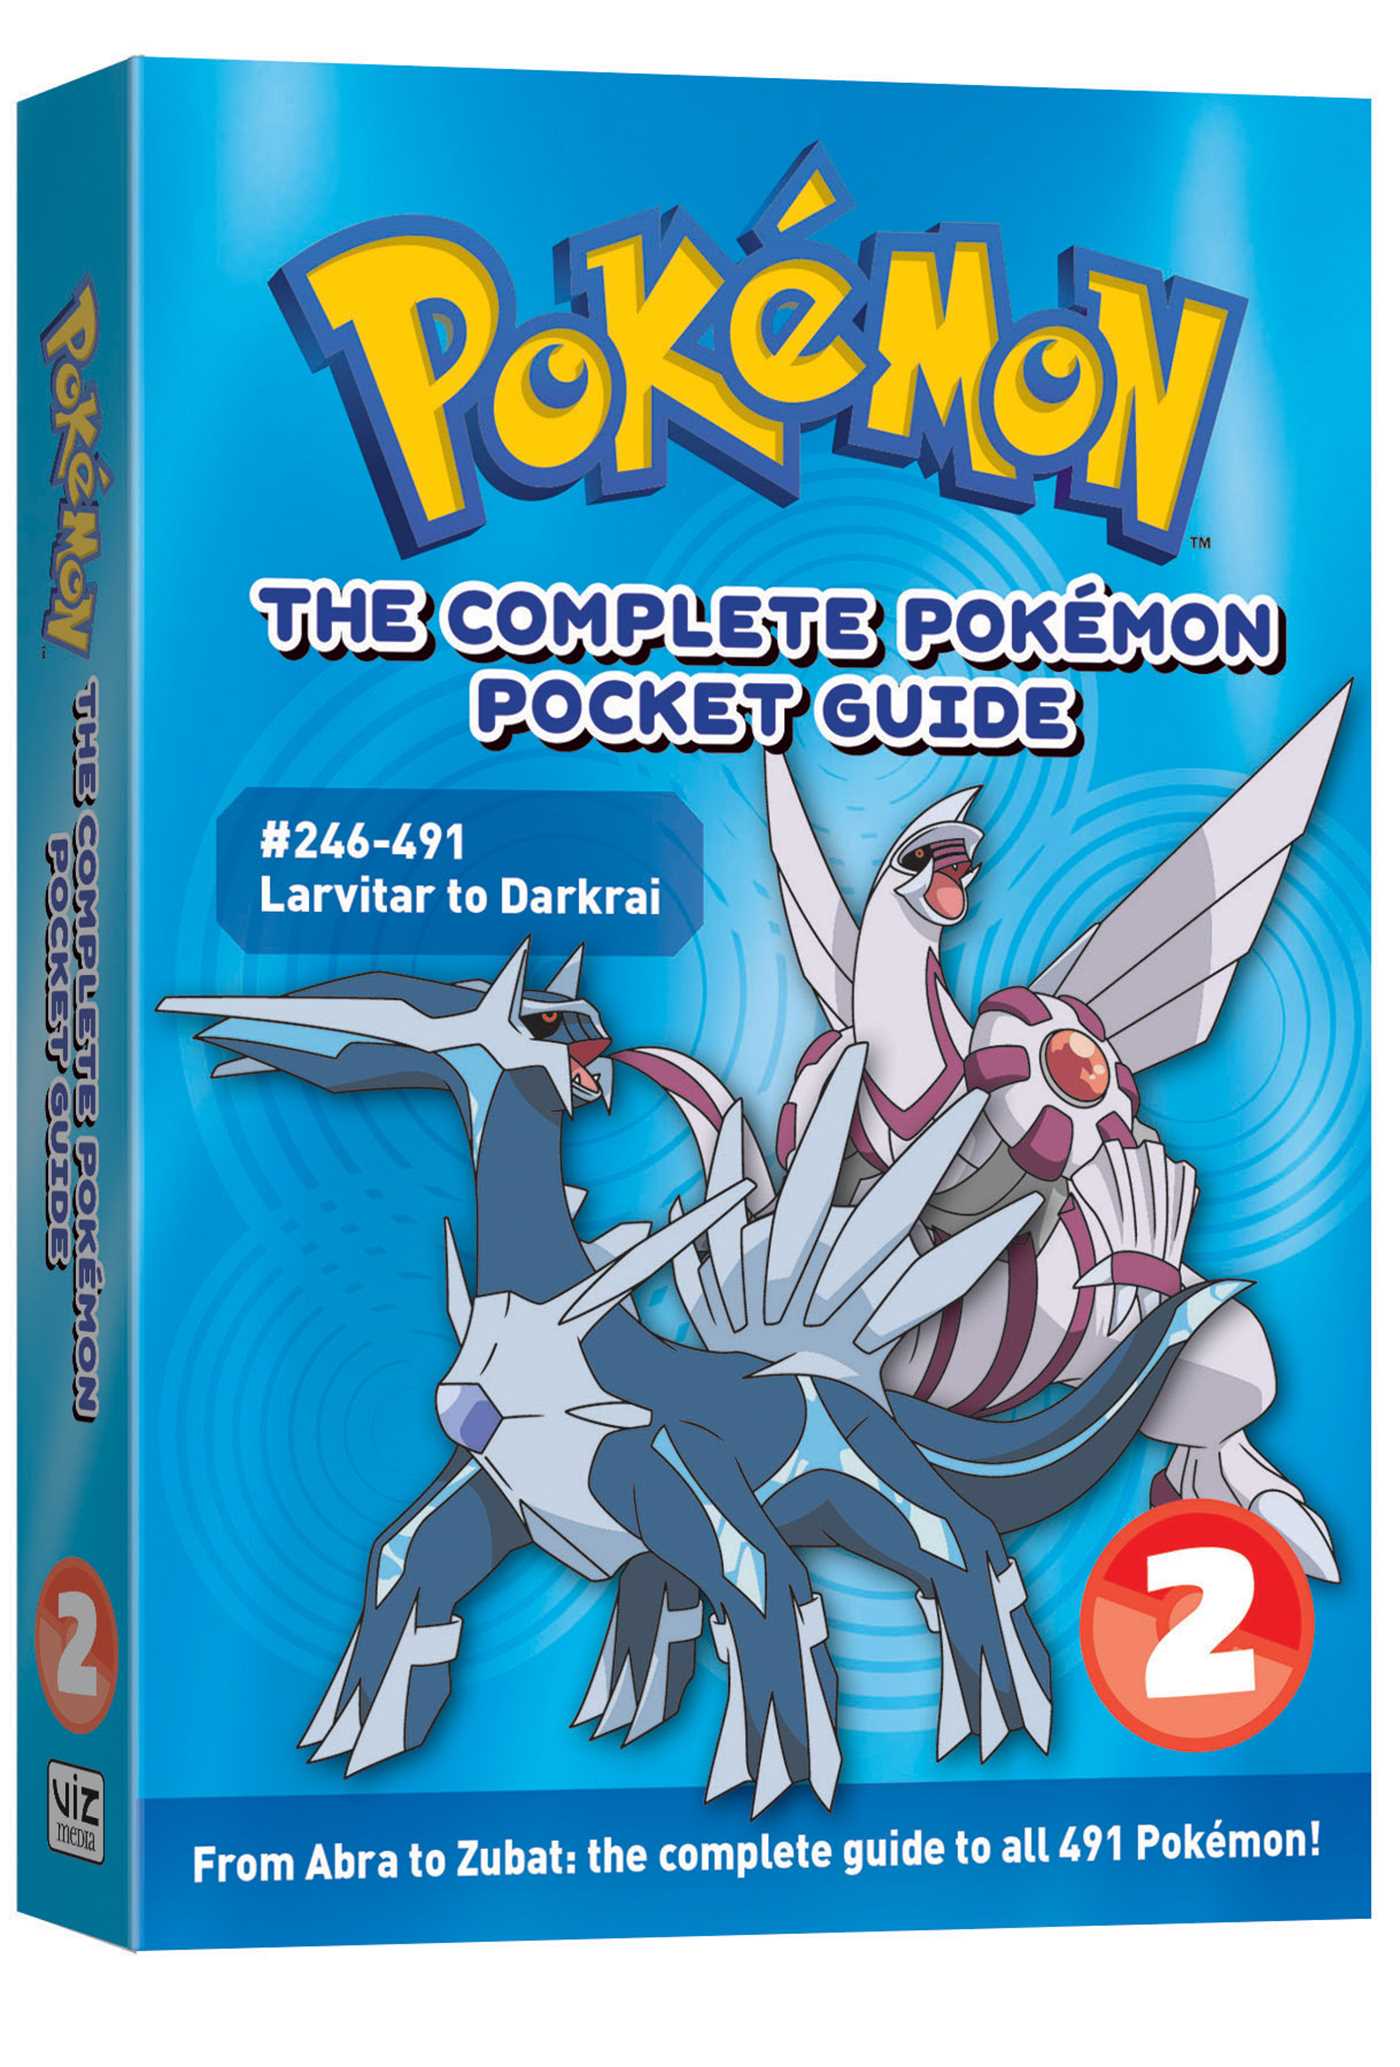 The Complete Pokemon Pocket Guide Volume 2 (2nd Edition) image count 0